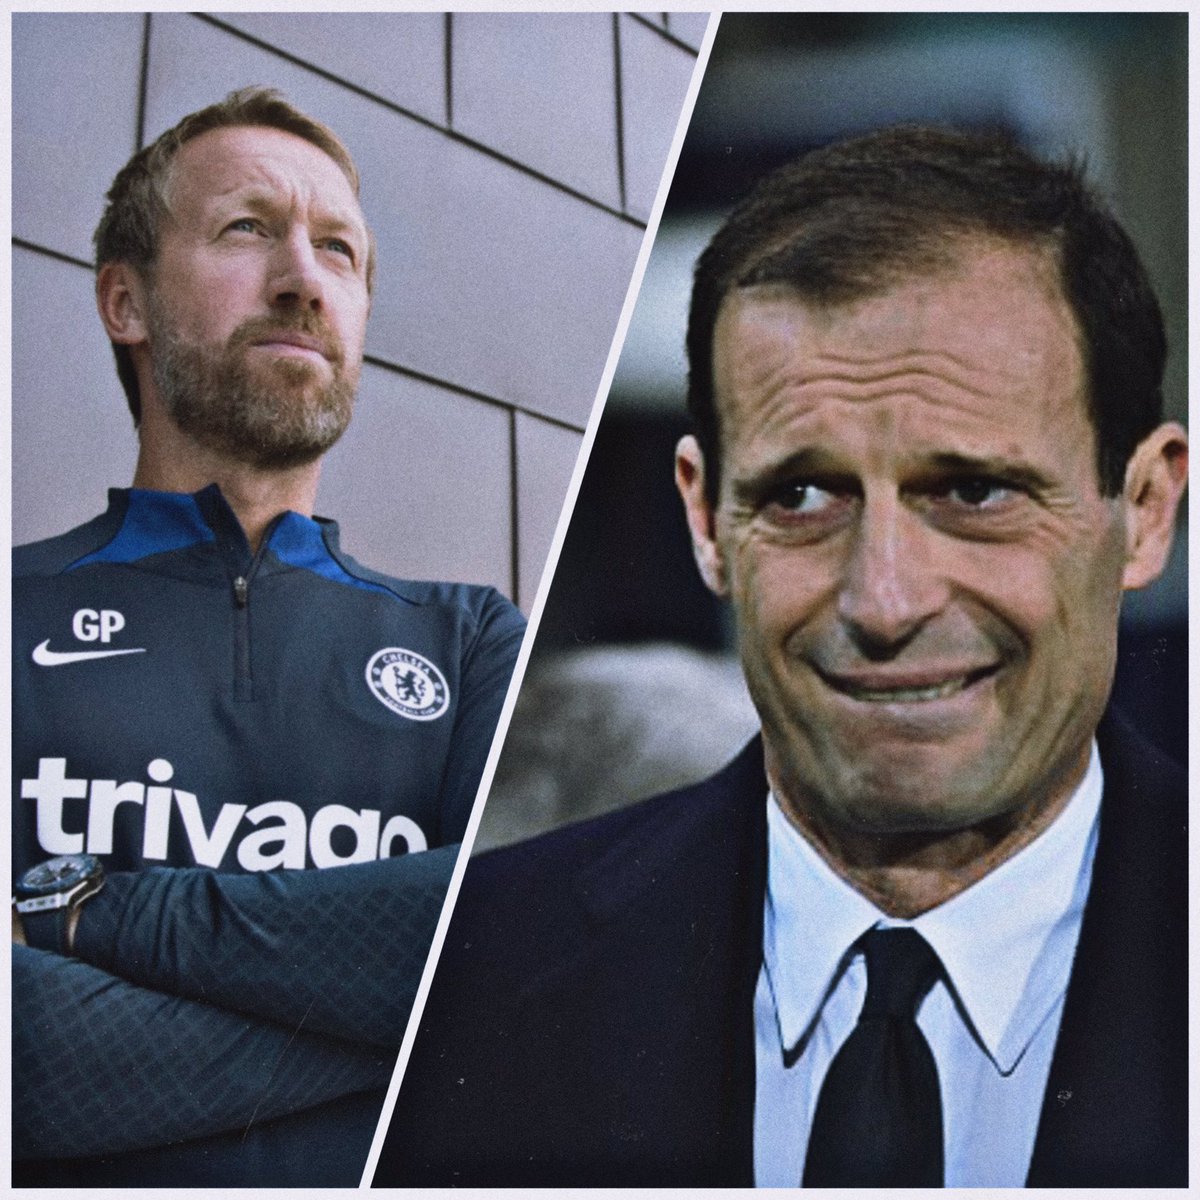 🆕 PODCAST 🎙 feat. @rithwikrajendra & @calcio_danny - • Newcastle’s new era - Story so far • Southampton’s interesting youth project • Graham Potter at Chelsea - Initial thoughts • Allegri & Juve - Time for a breakup? 🔗 - bit.ly/3xUkAZo